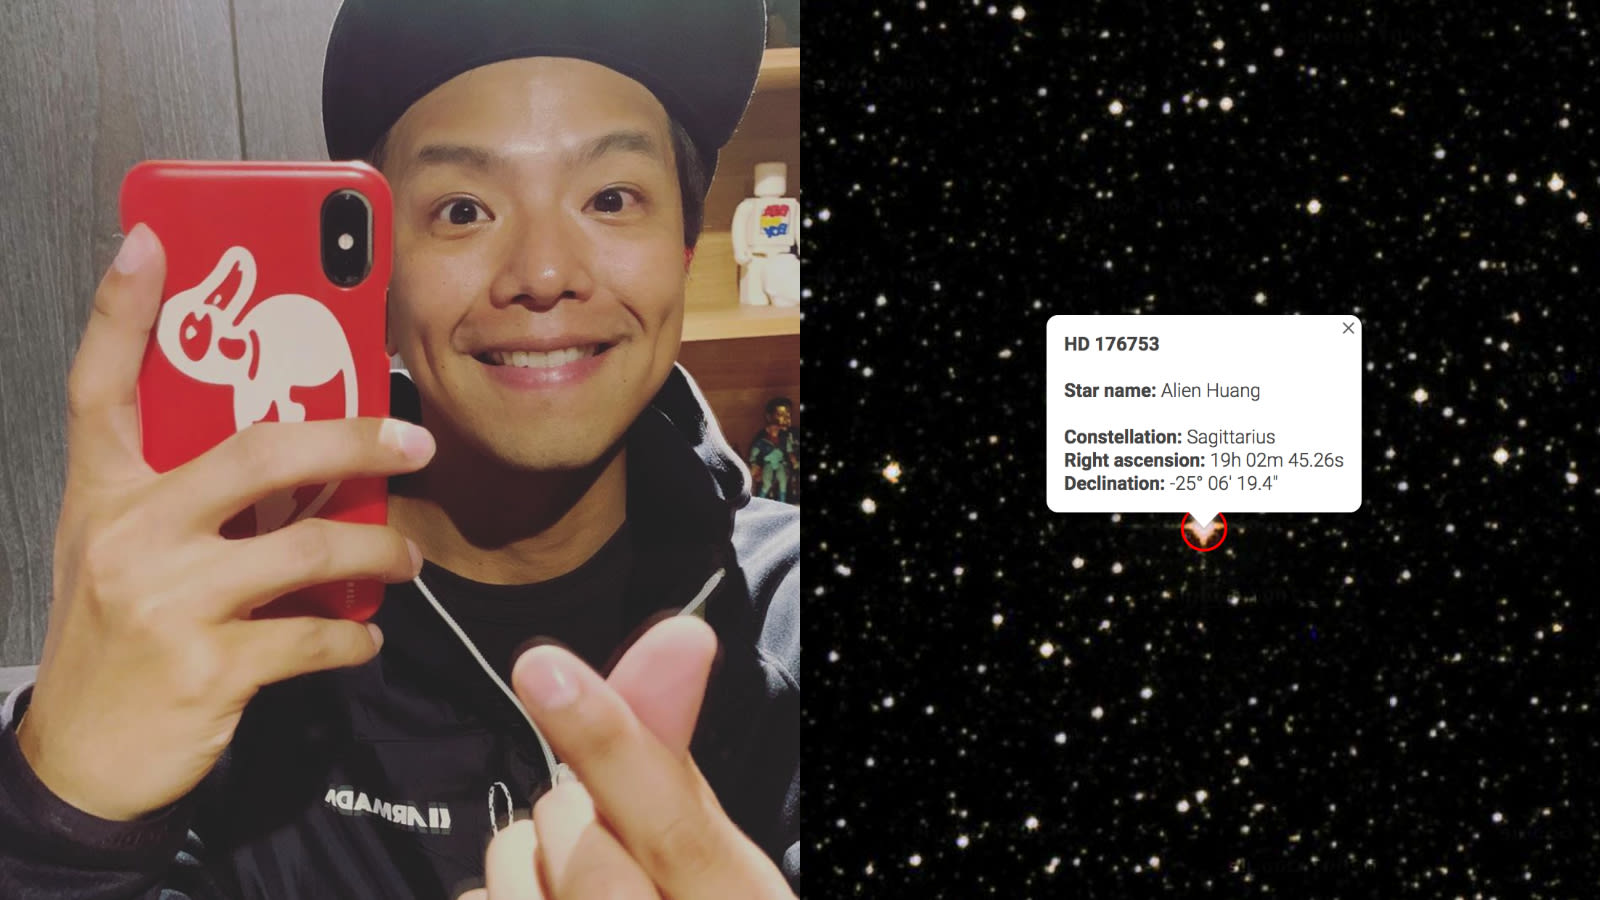 A Fan Officially Named A Star After Alien Huang (And It’s Not As Expensive As We Thought)